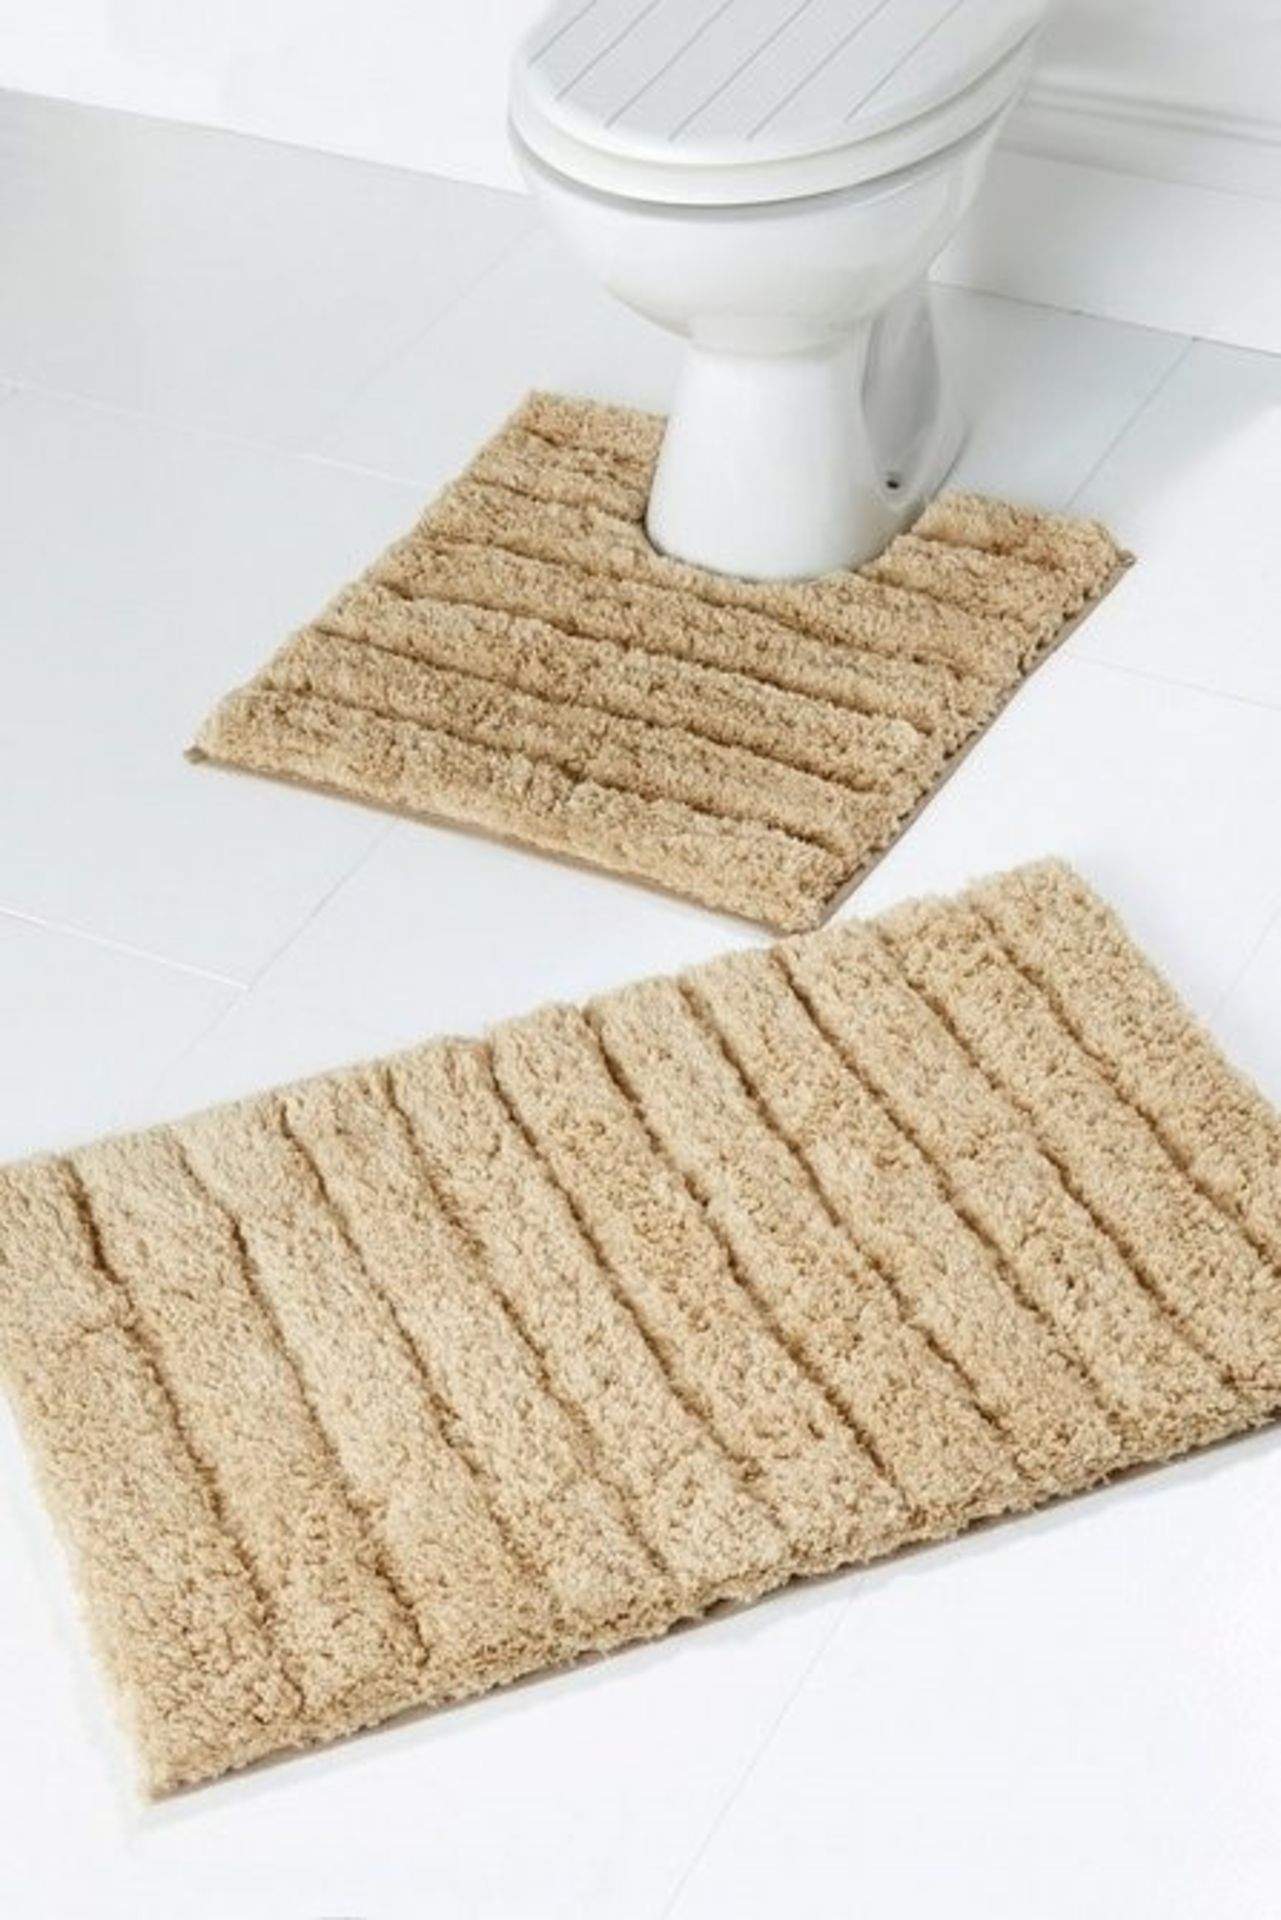 1 AS NEW BAGGED SUPER SOFT BATH MAT SET IN MOCHA (PUBLIC VIEWING AVAILABLE) - Image 2 of 2